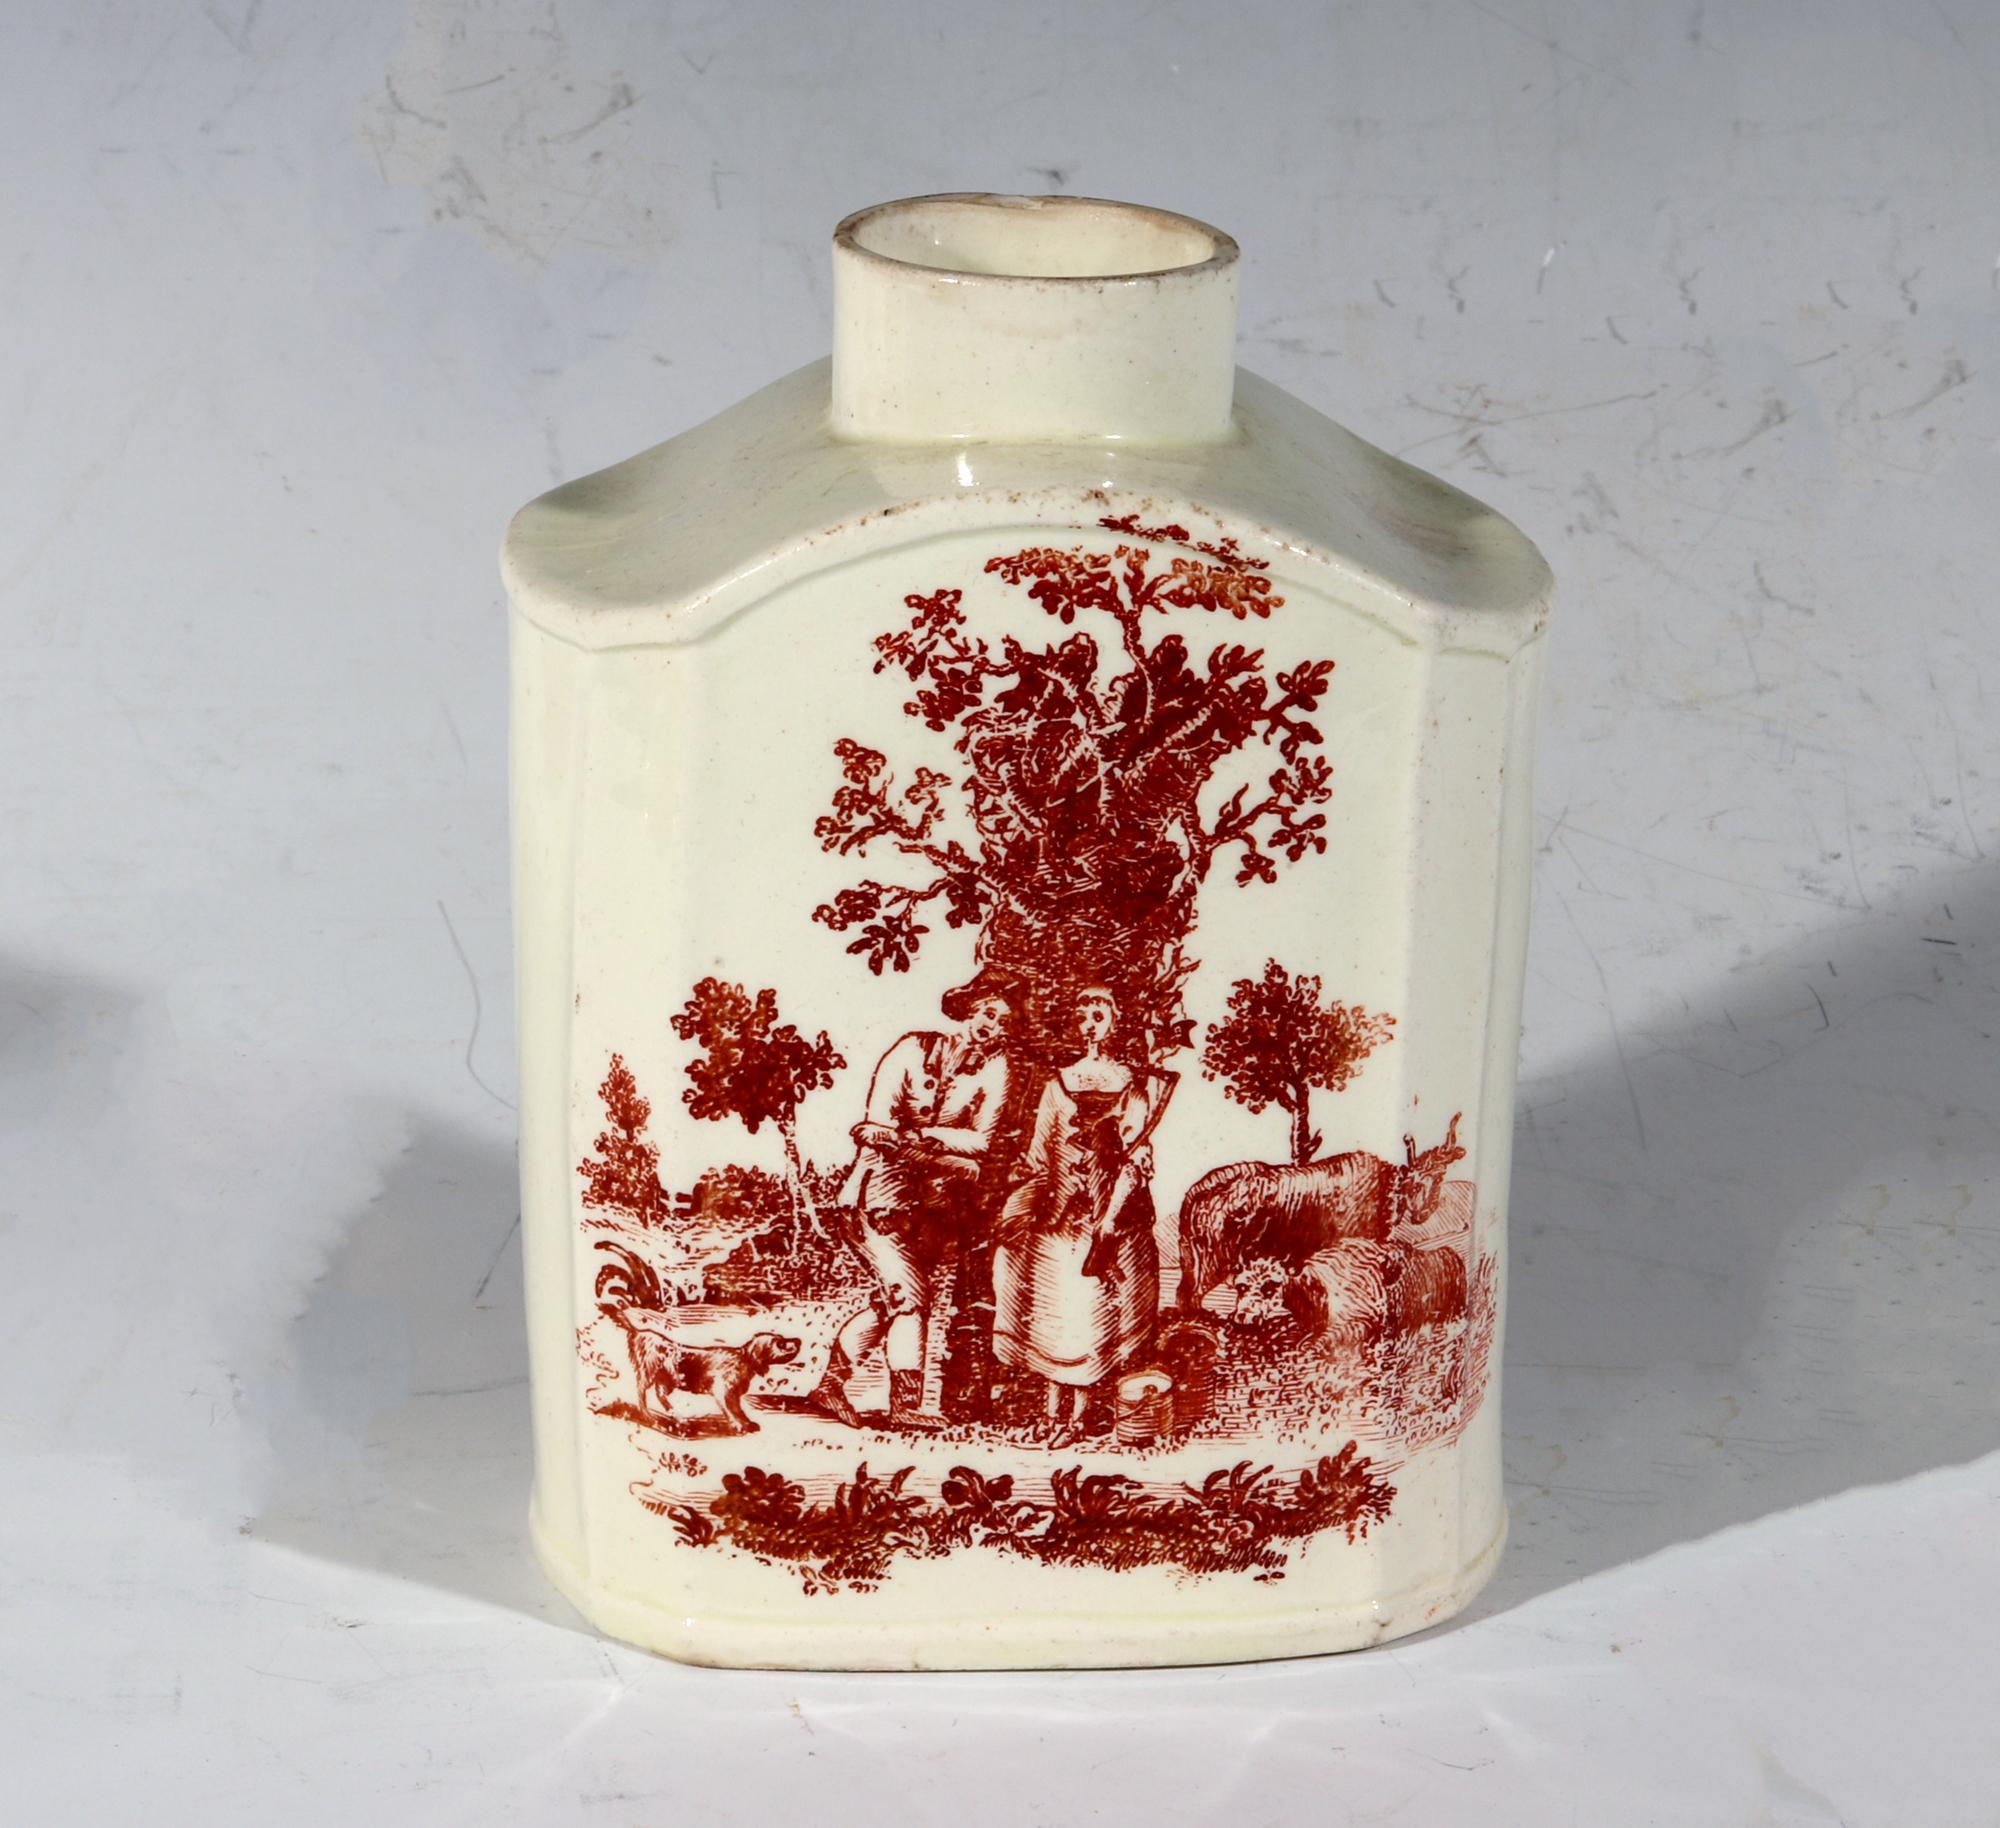 18th Century Creamware Red-printed Tea Caddy,
circa 1765-75

The creamware tea caddy or teapoy is rectangular in form with large panels to front and back with a concave edge to each side. The sides are curved and the sloping shoulders rise to a